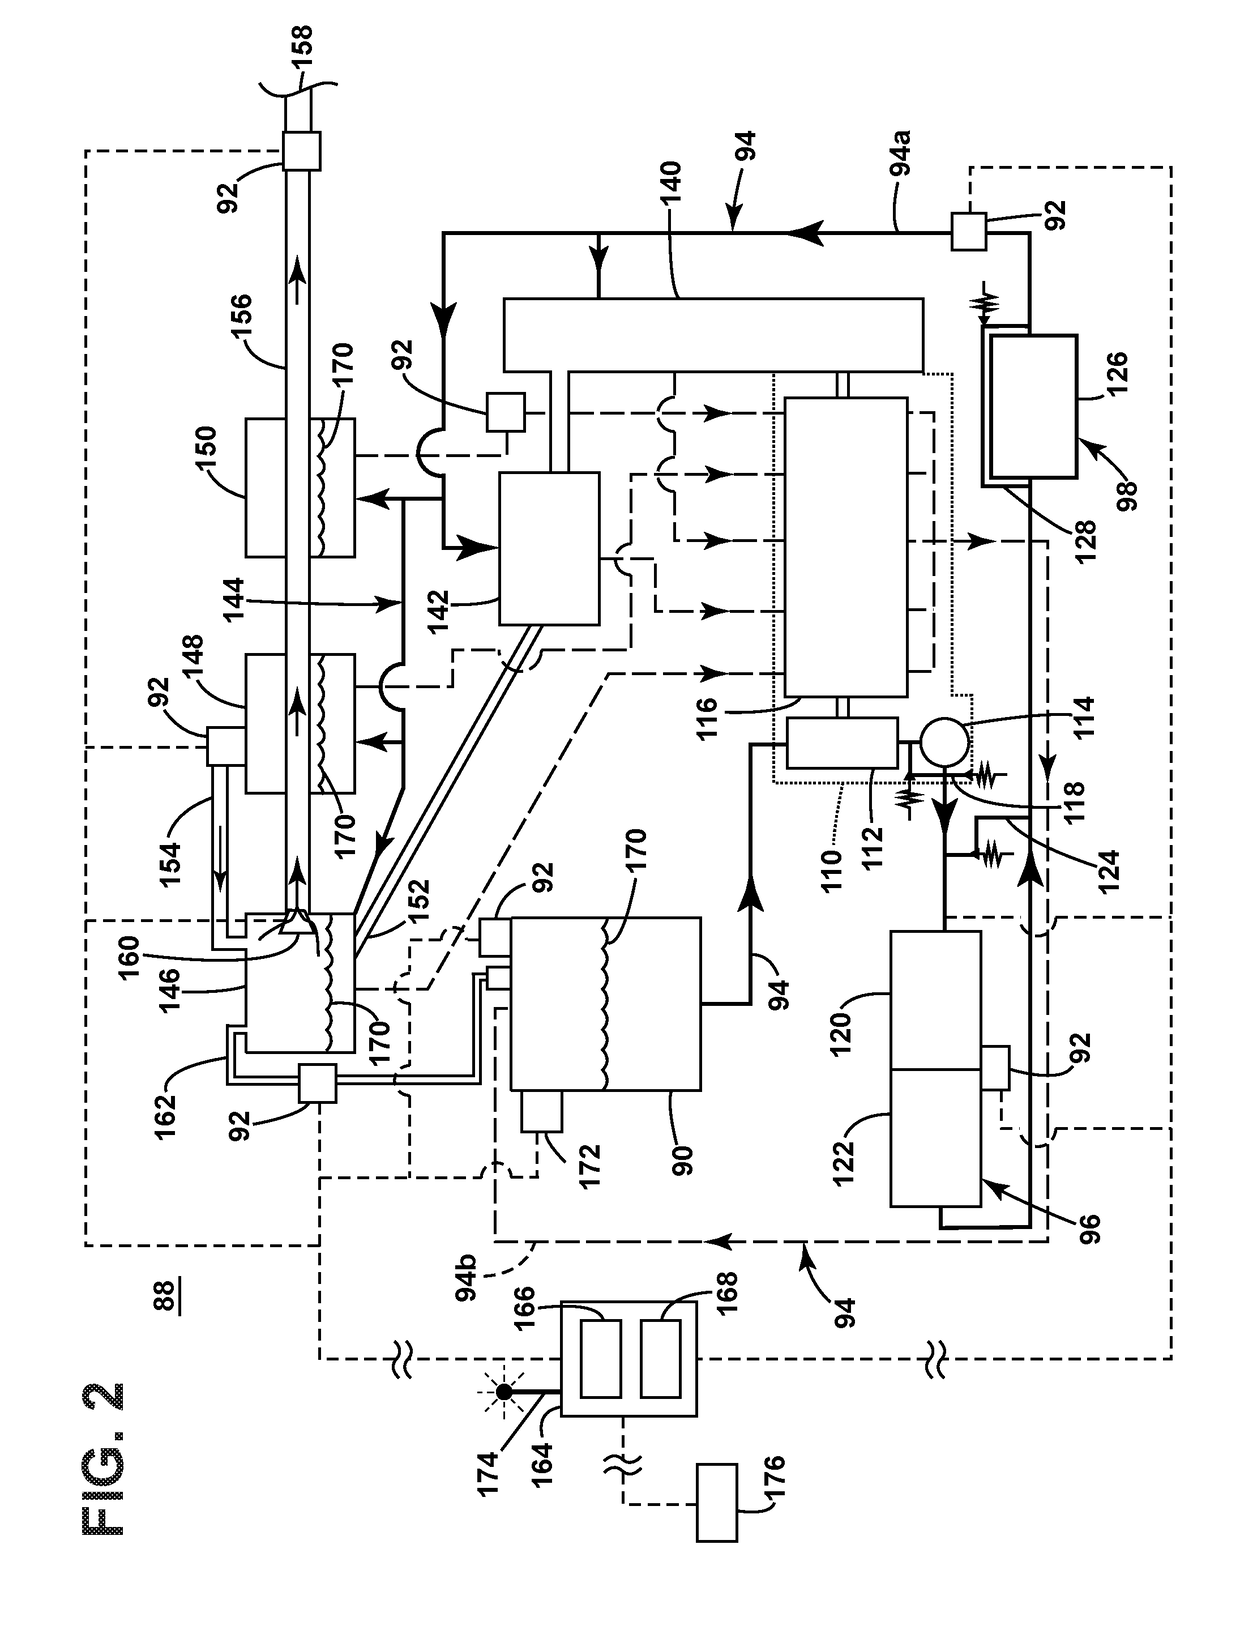 Method and apparatus for determining lubricant contamination or deterioration in an engine